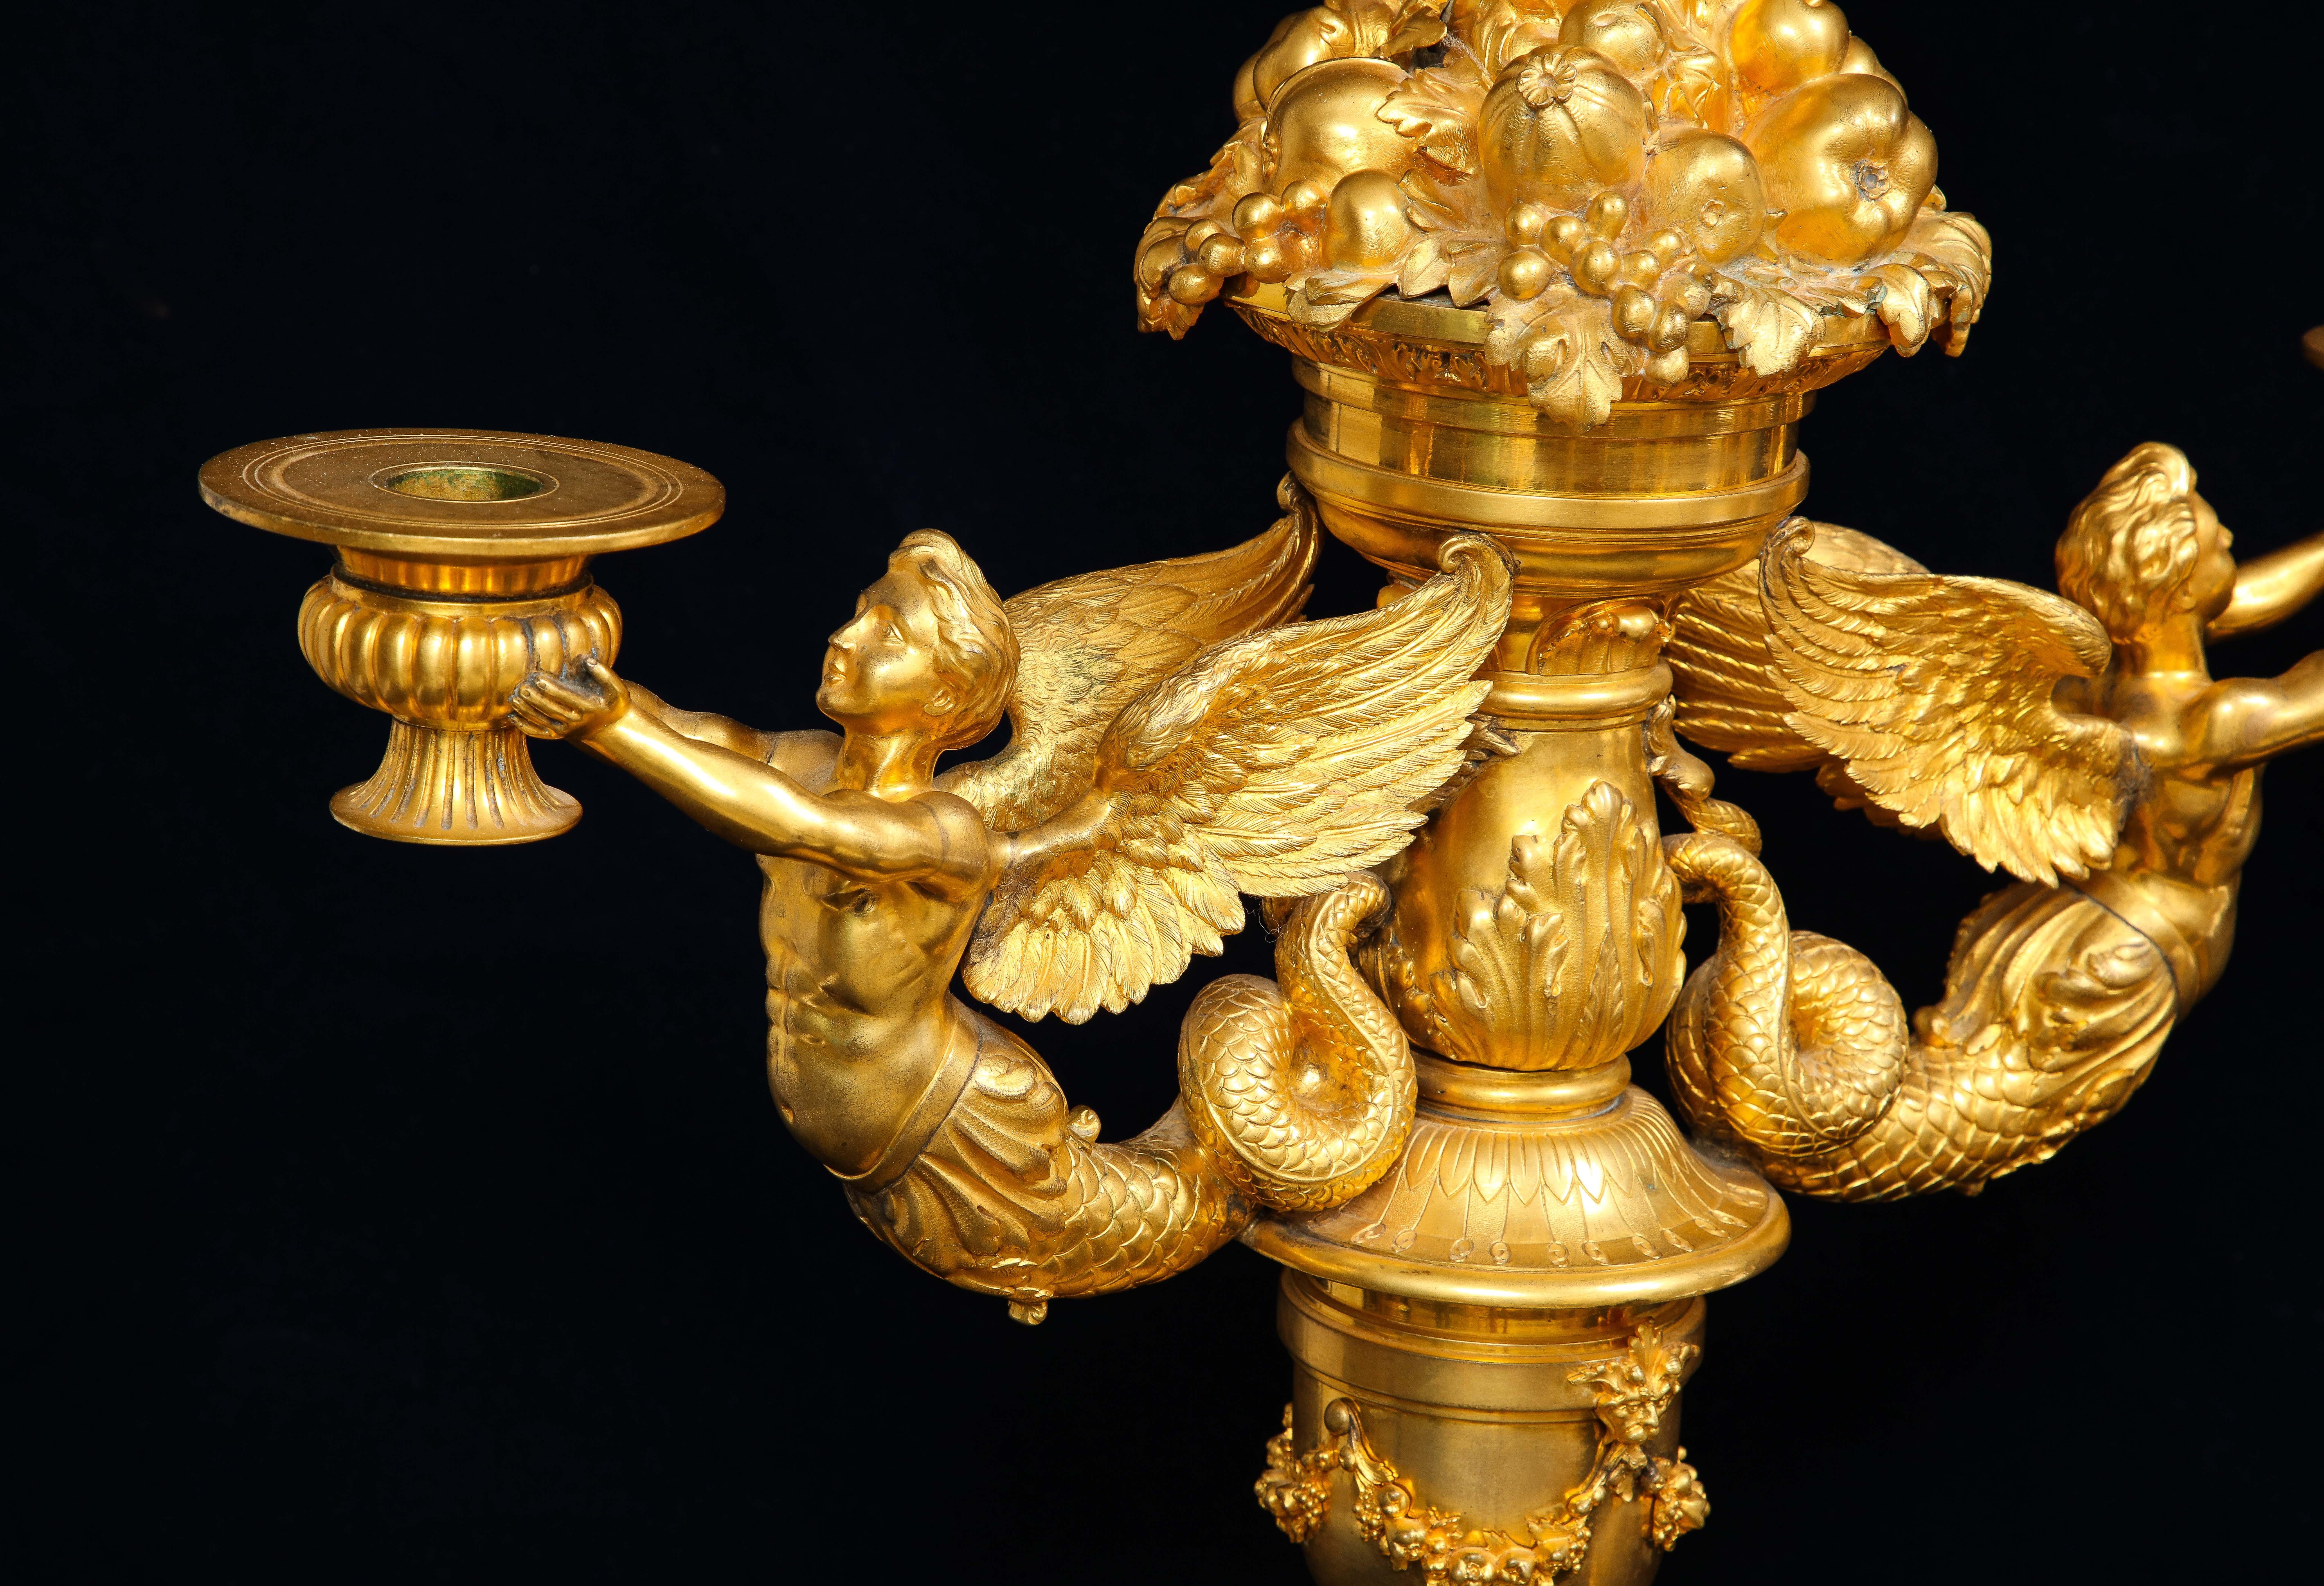 Marvelous Pair of 19th C. French Ormolu Four Arm Candelabras, Signed P. Canaux For Sale 5